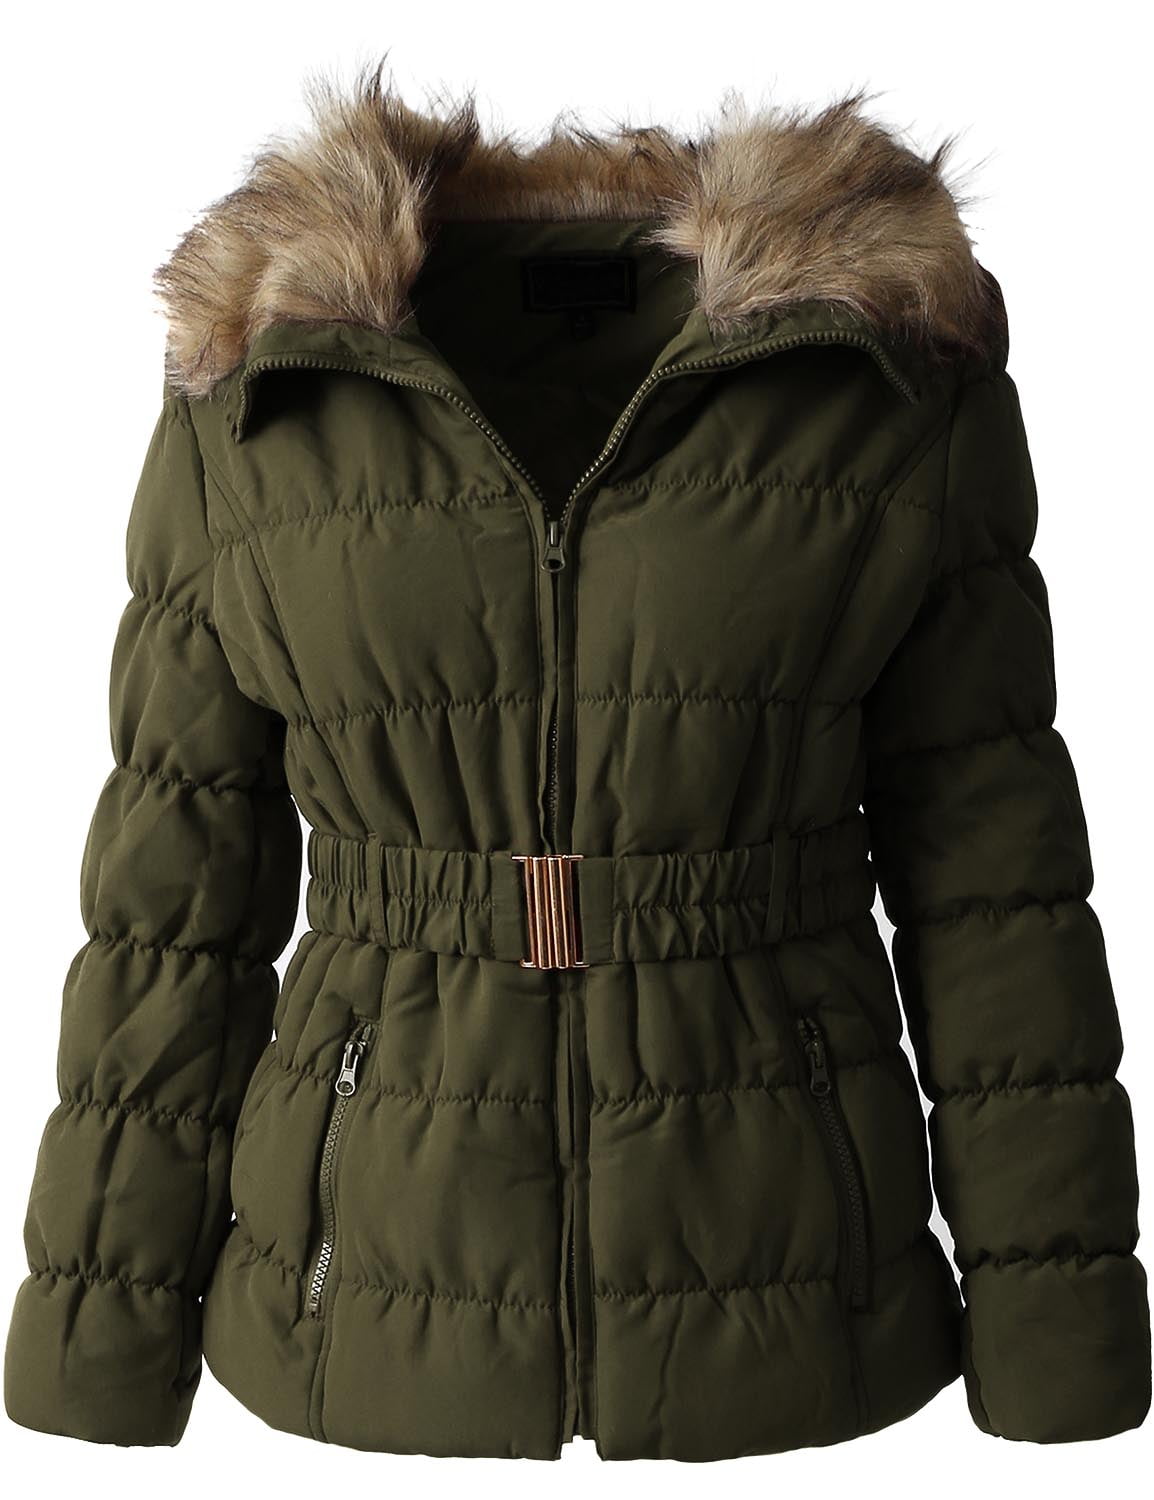 Ma Croix Womens Fur Lined Coat Belted Jacket Parka Quilted Faux Fur ...